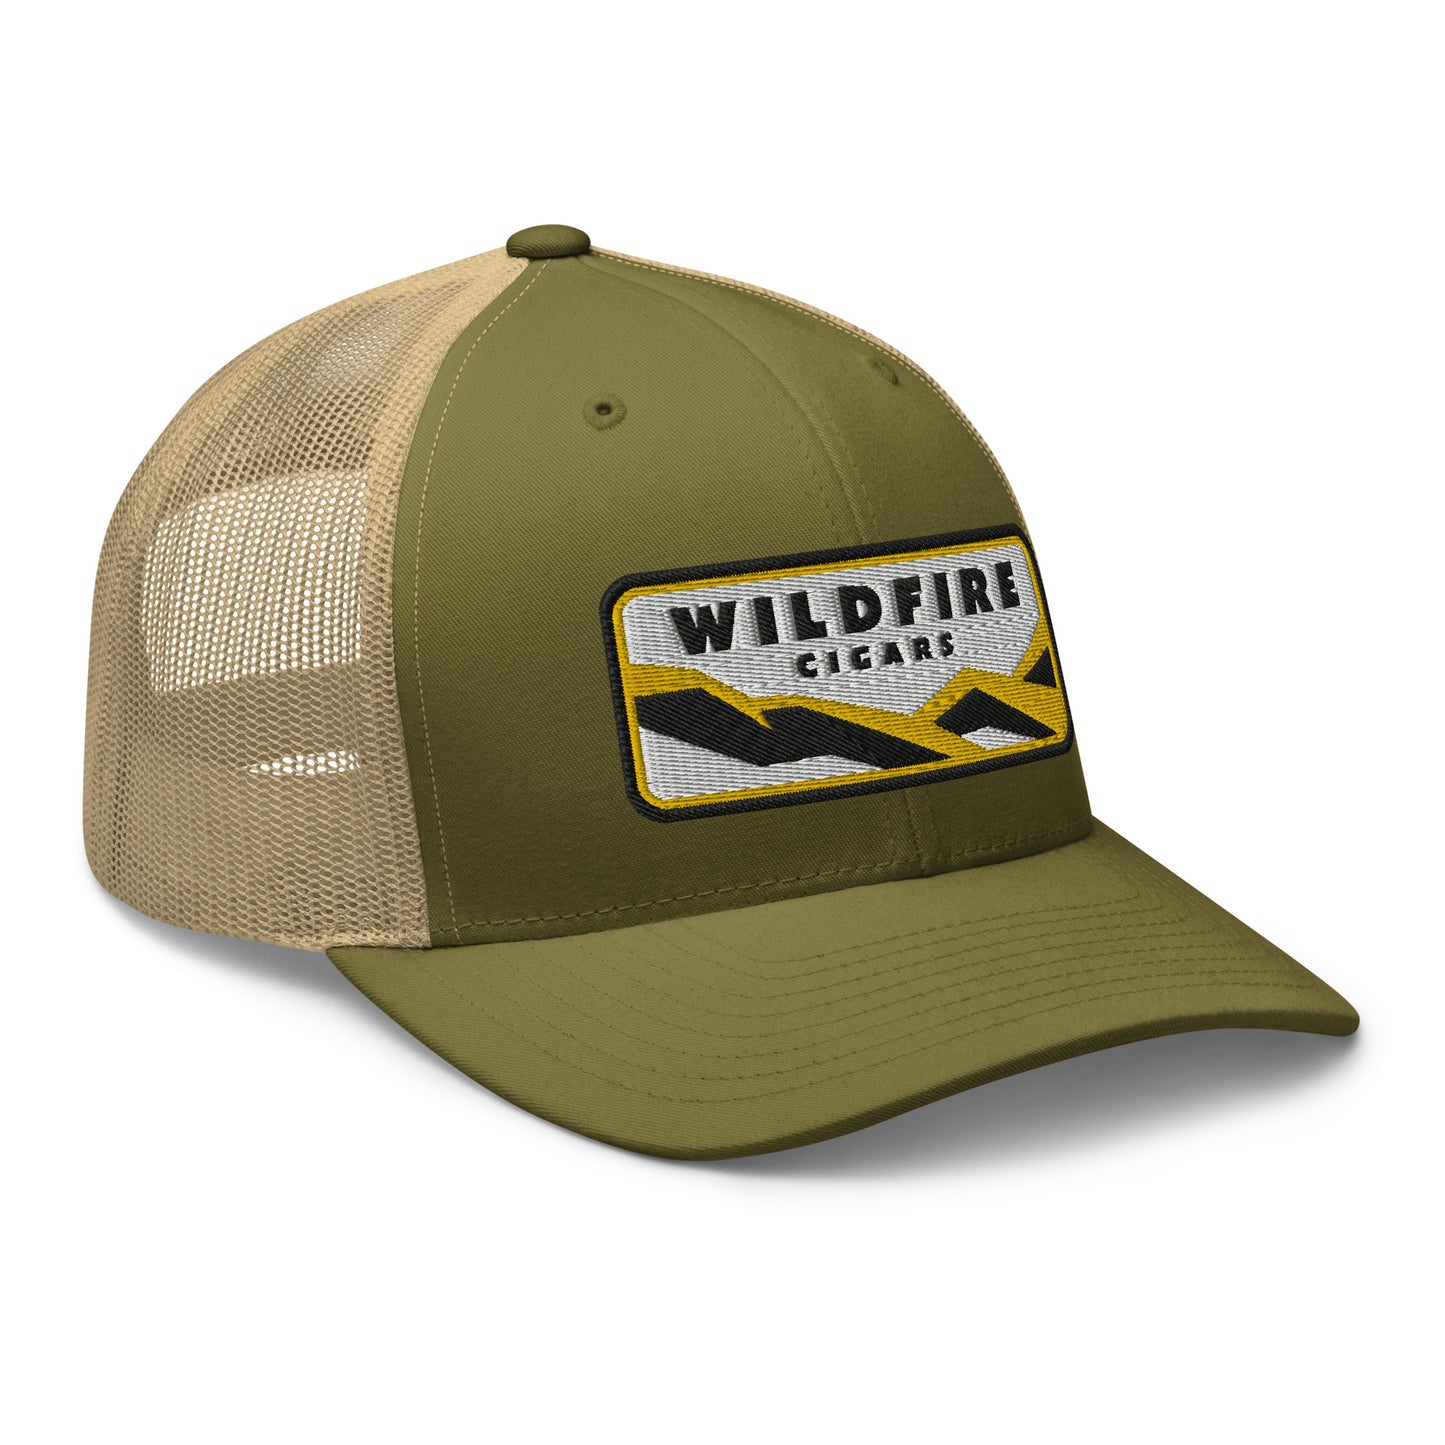 Wildfire Cigars retro trucker hat in moss and khaki facing from the front at a right angle